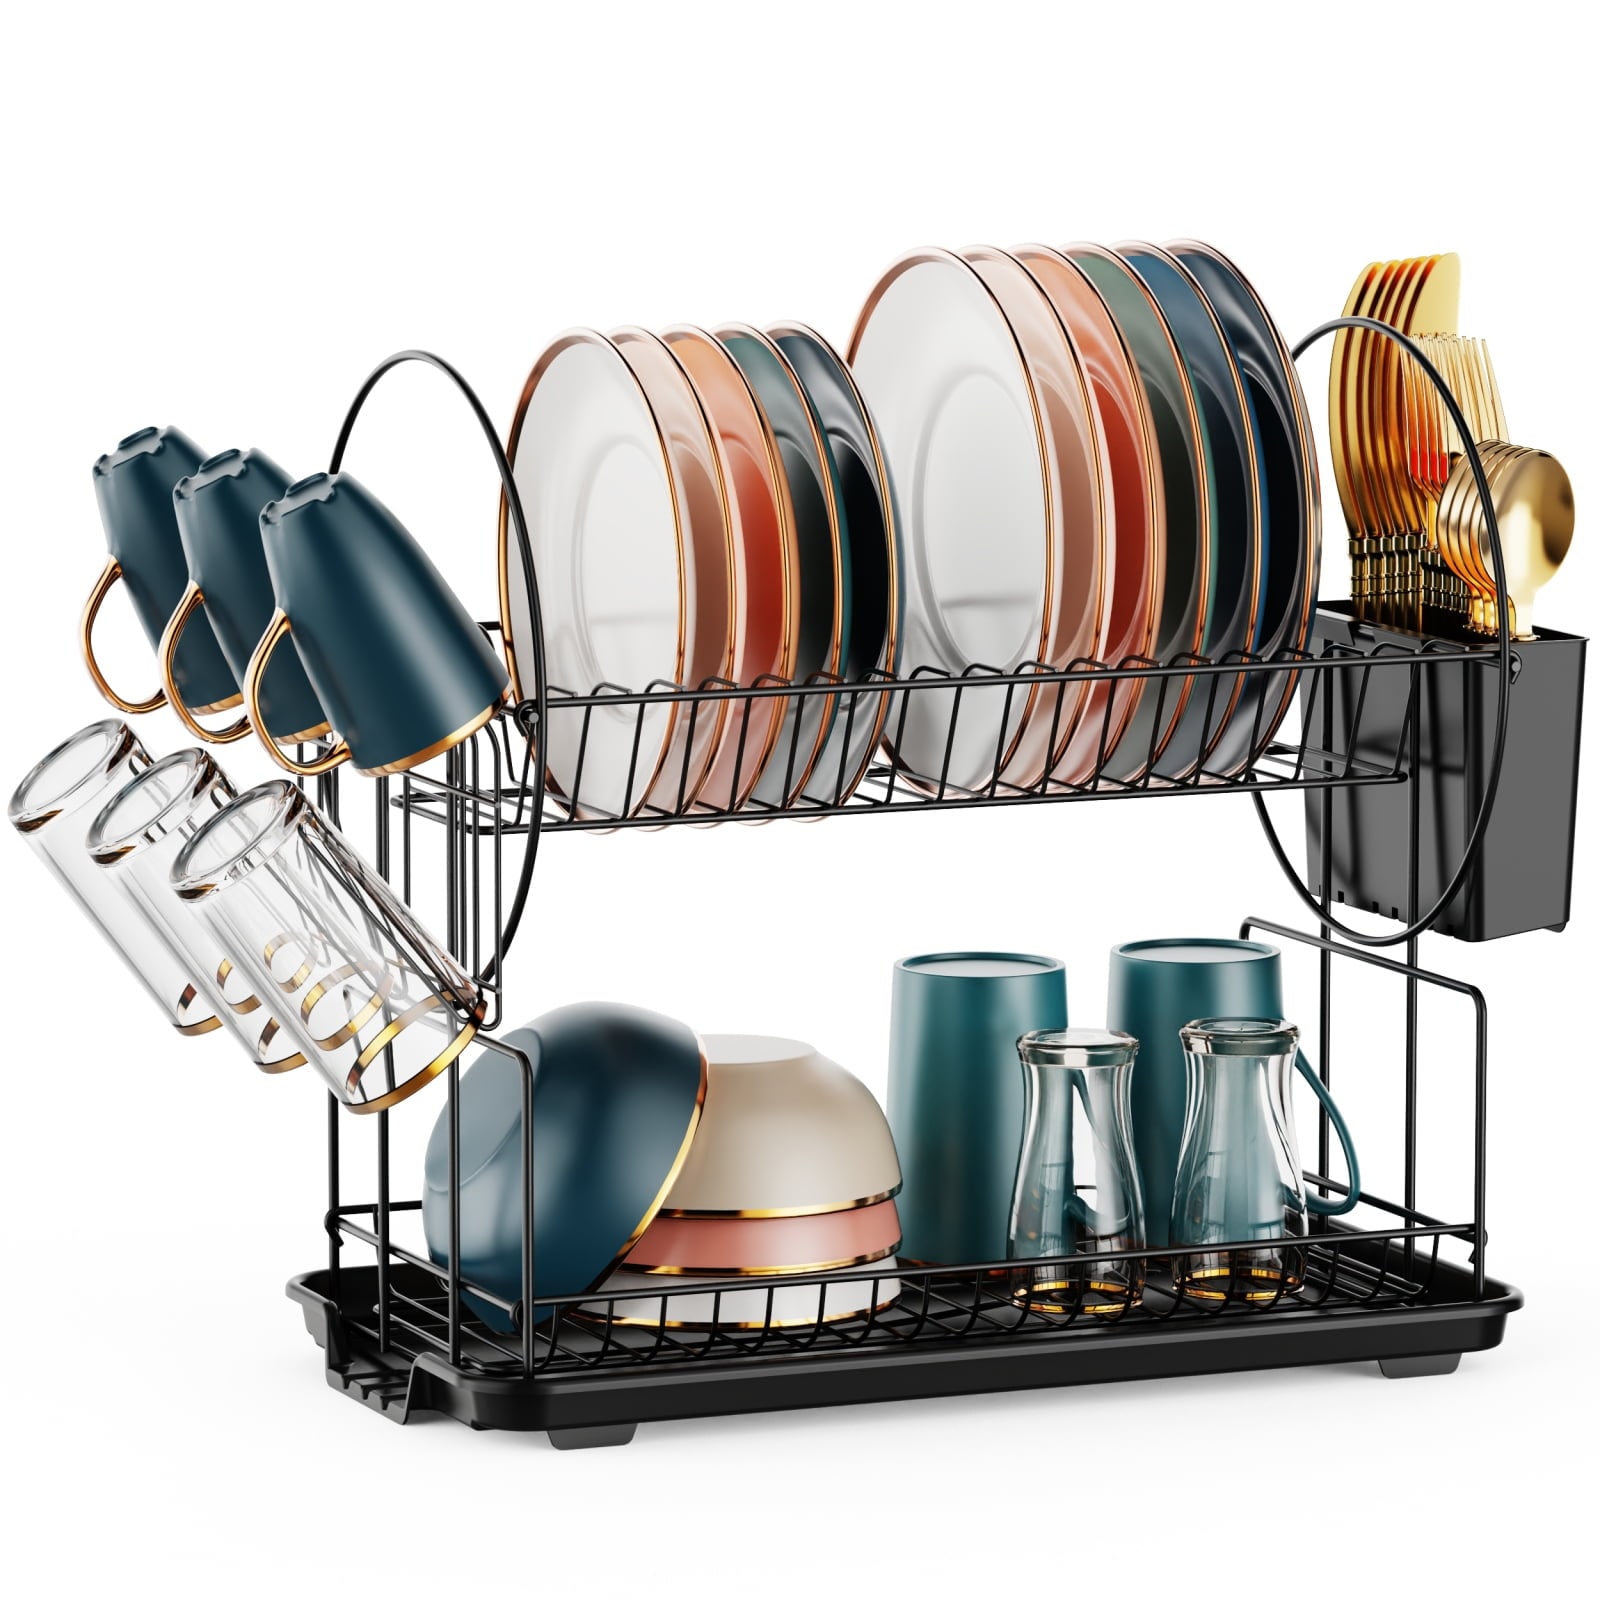 2-Tier Detachable Dish Drying Rack with Cutlery Holder - Costway